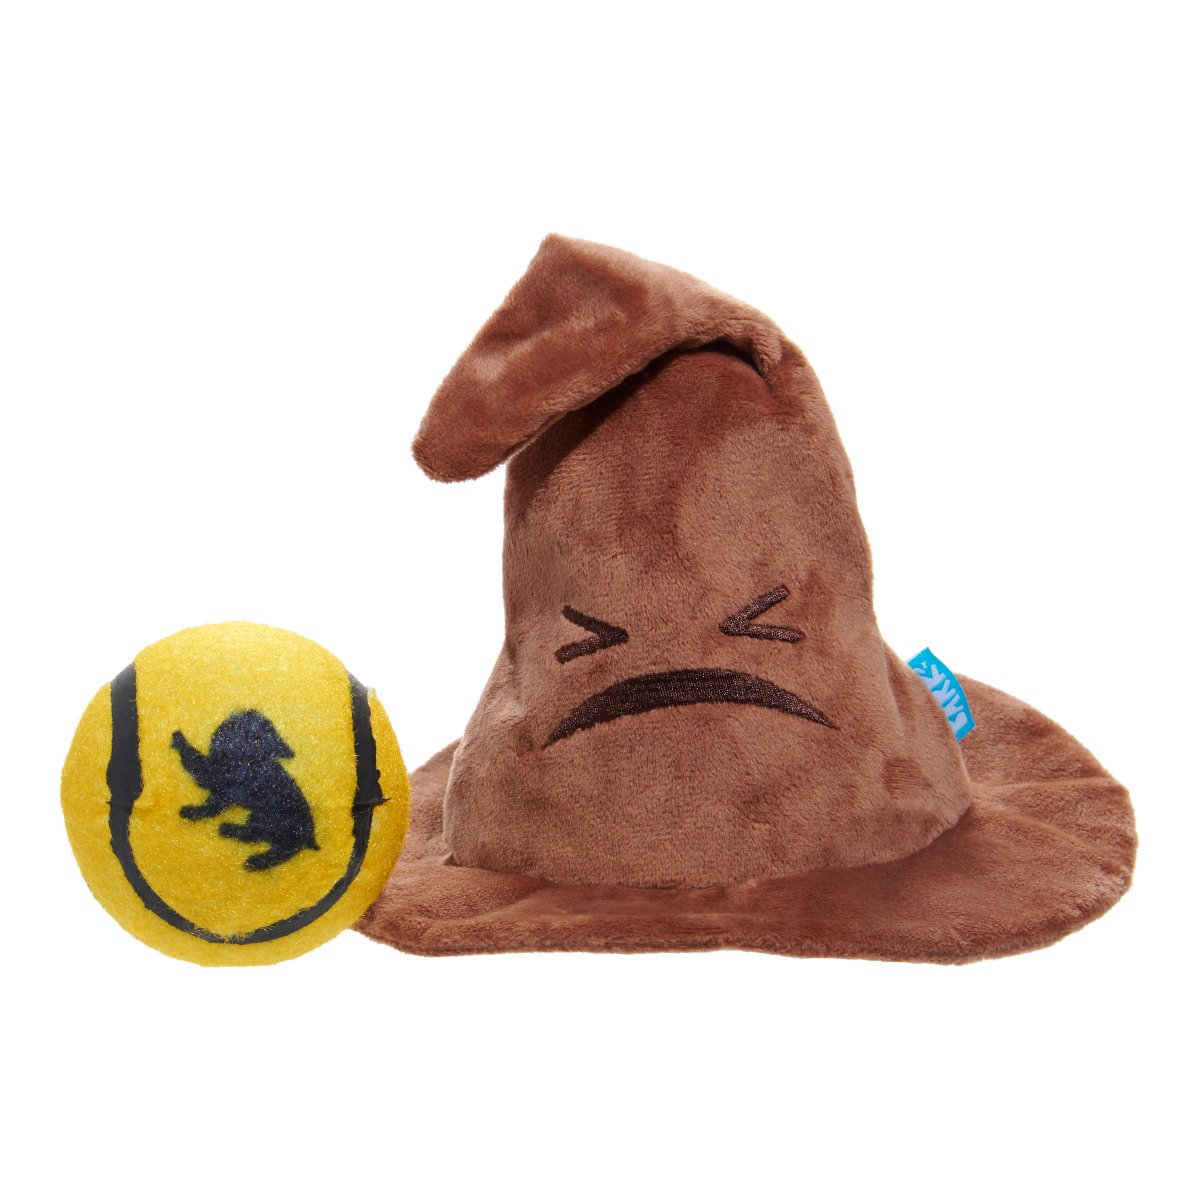 The Sorting Hat™